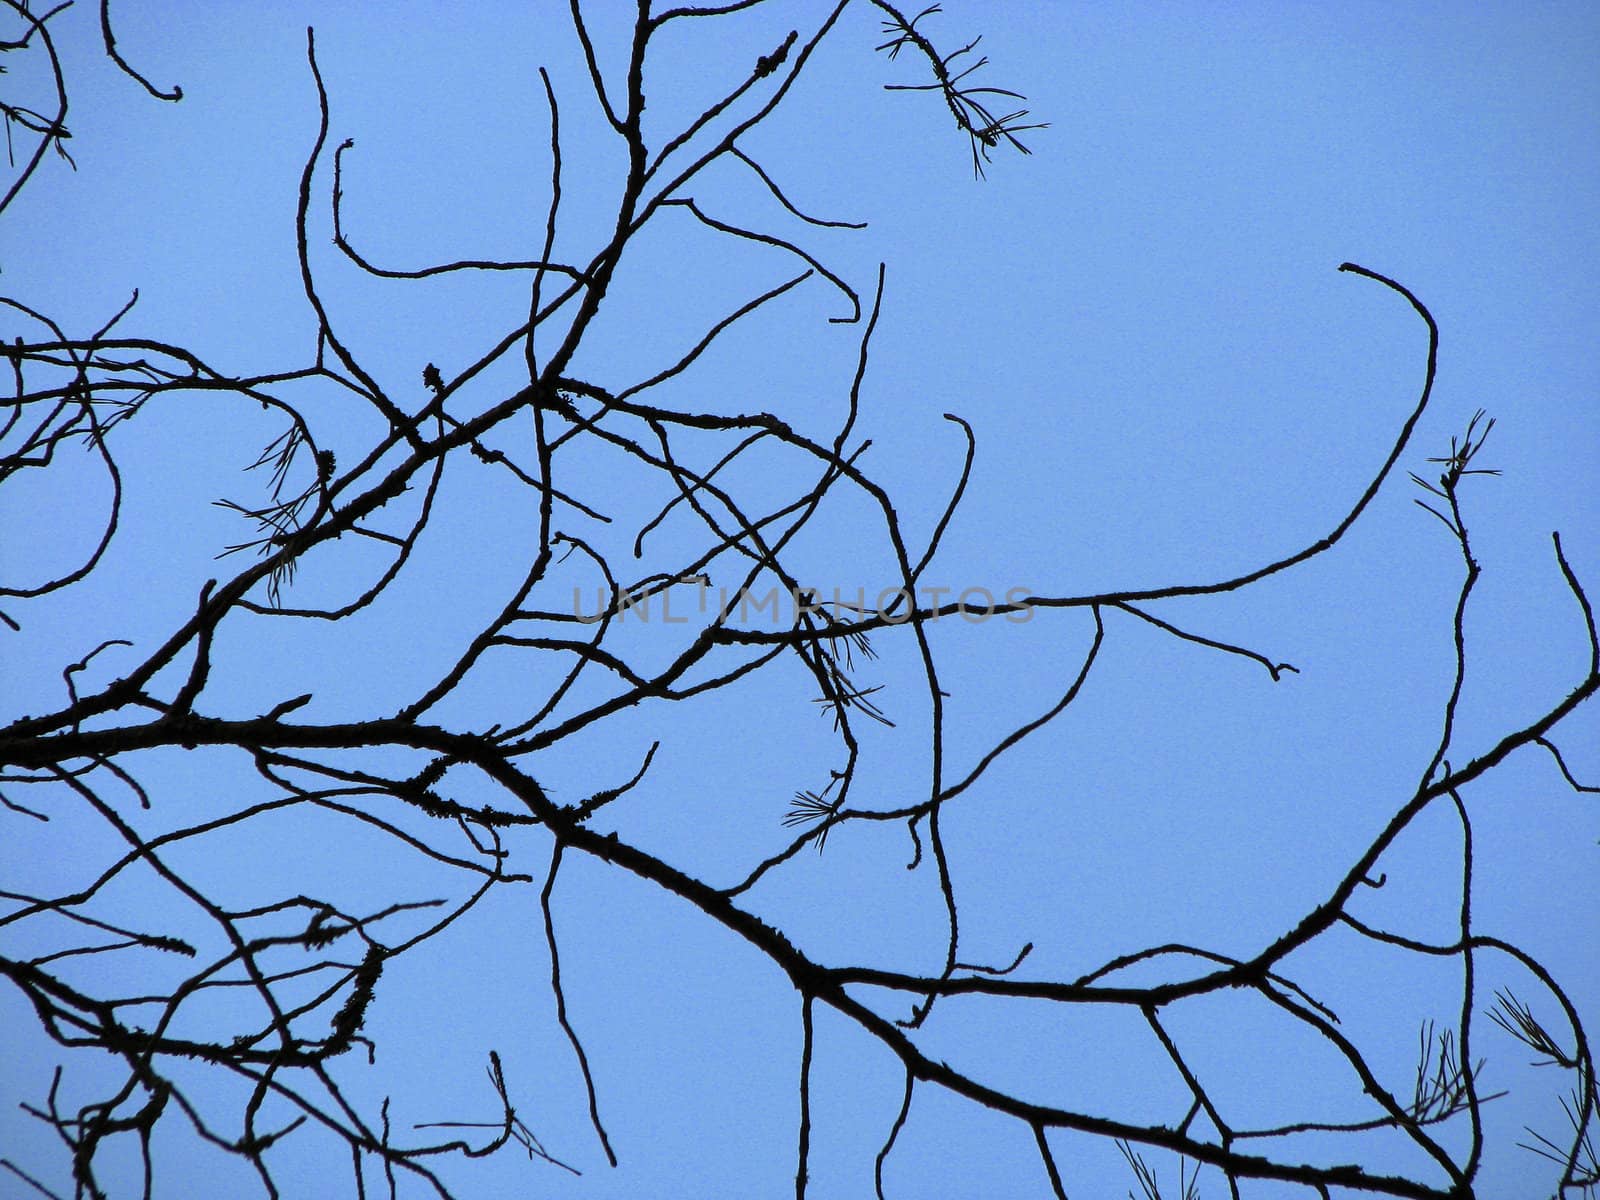 Dead branch and blue sky